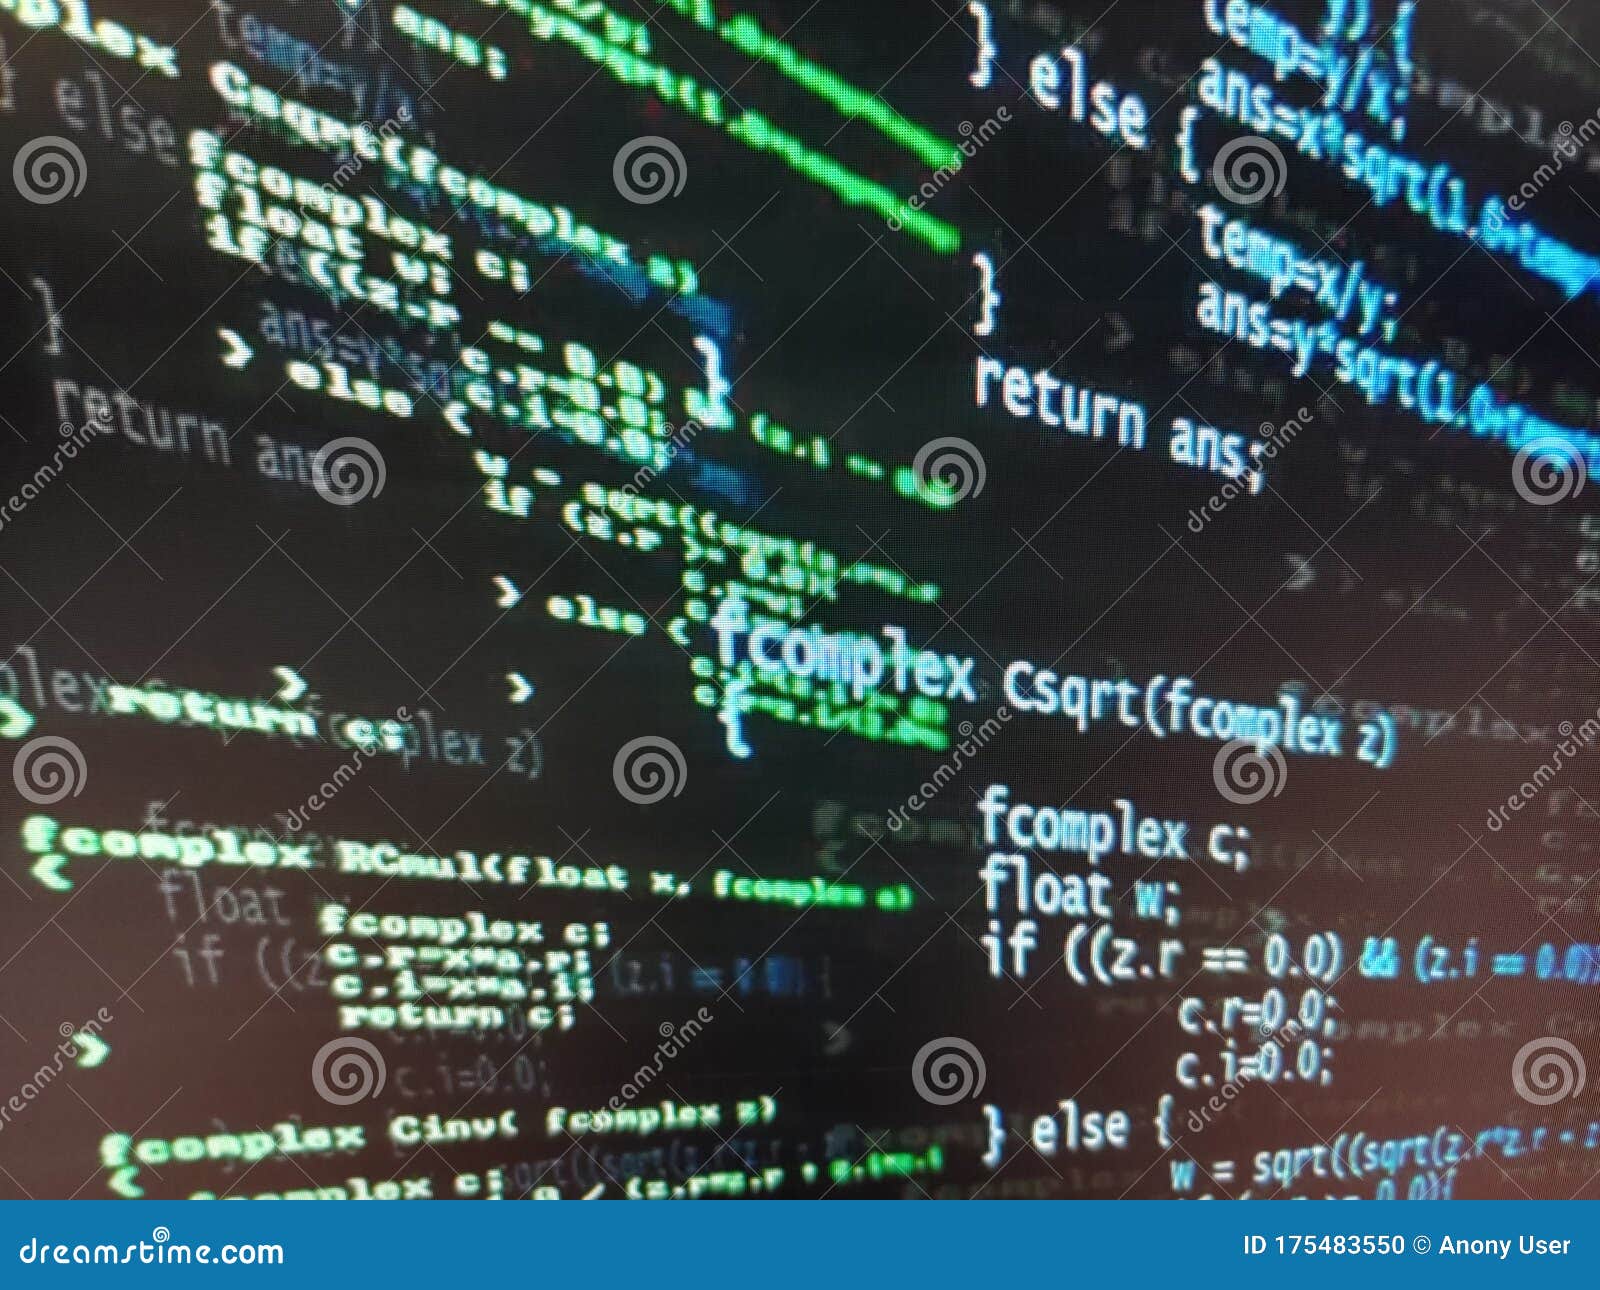 Code Connection Script Hacker Connections Scripts Coding Connected